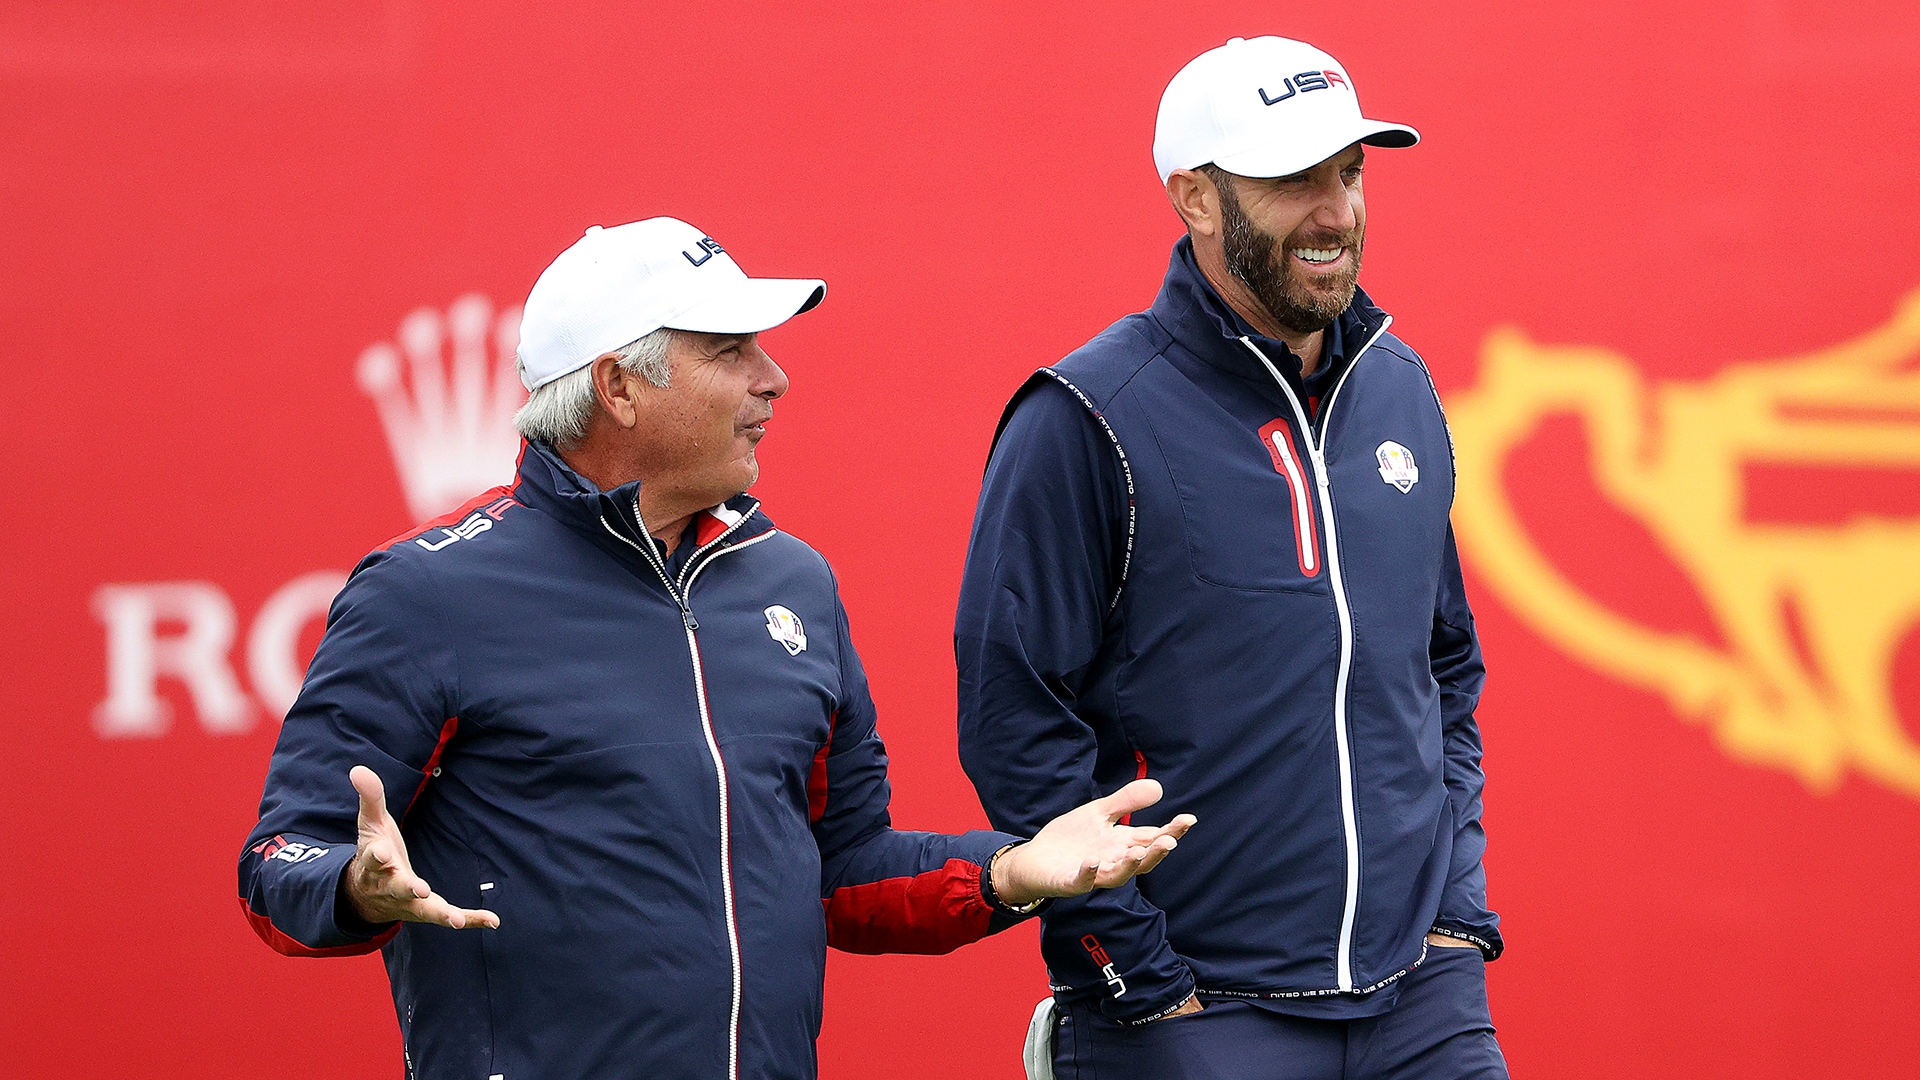 Fred Couples reveals three U.S. Ryder Cup locks on his radio show